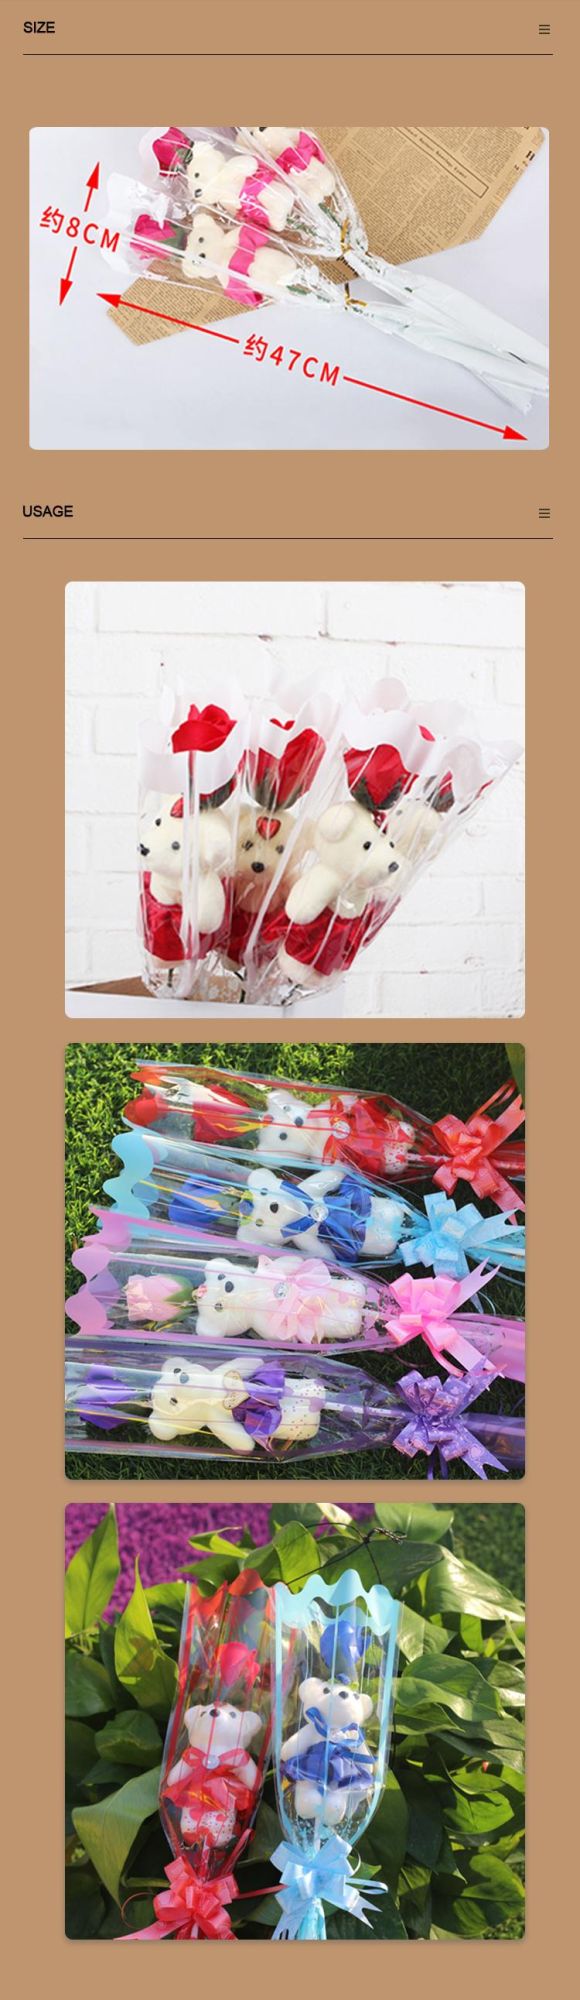 Cheaper Soap Flower Bouquet Gift with Teddy Bear for Christmas, Valentine′s Day, Mother′s Day Gifts